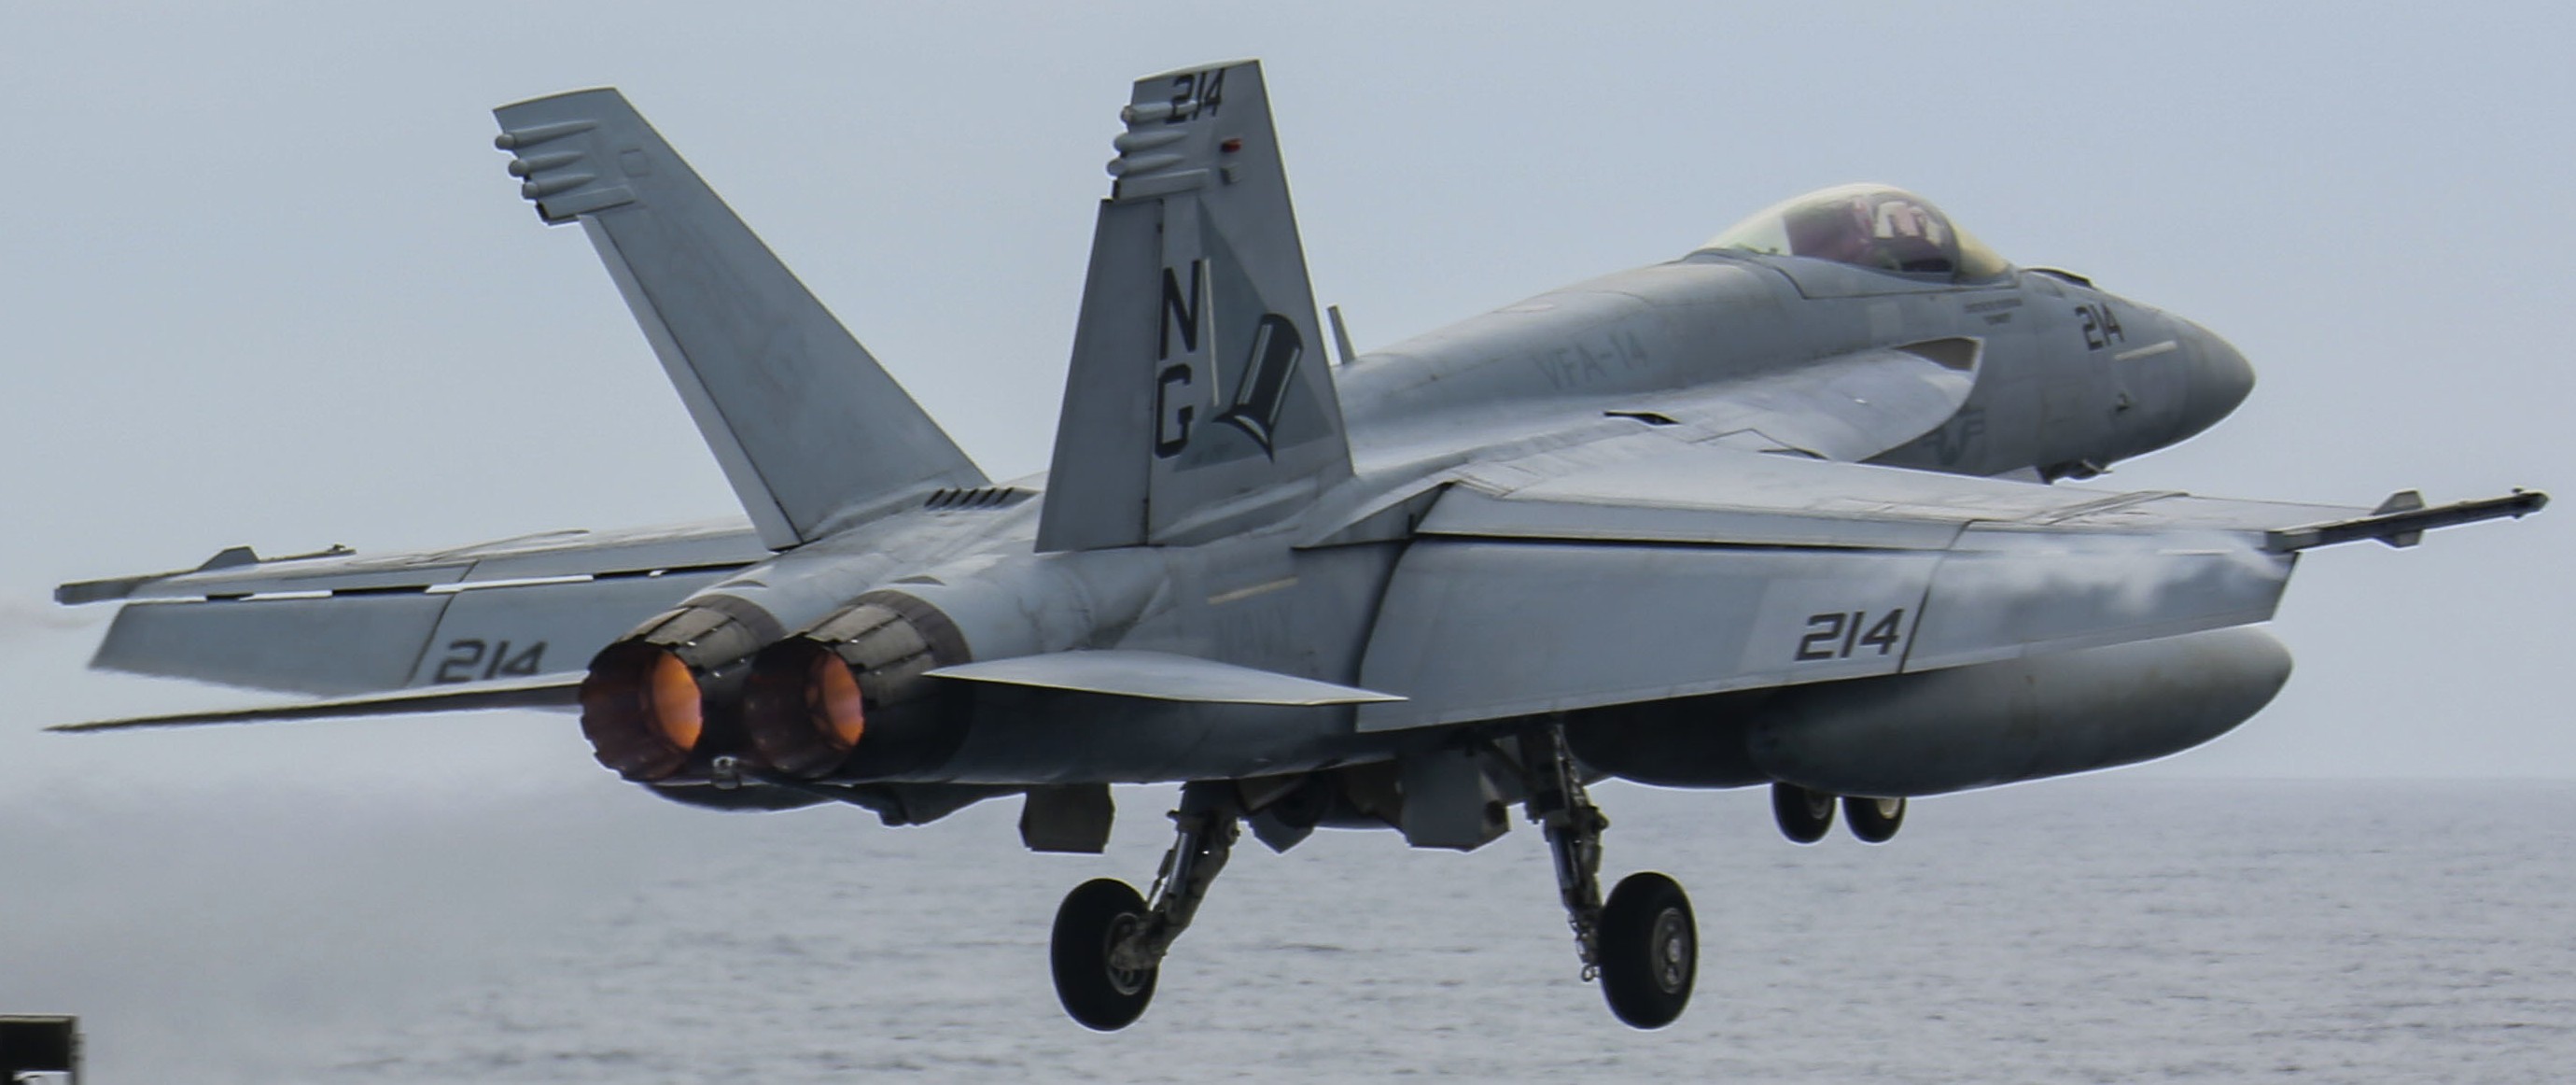 vfa-14 tophatters strike fighter squadron f/a-18e super hornet cvn-72 uss abraham lincoln cvw-9 us navy 84